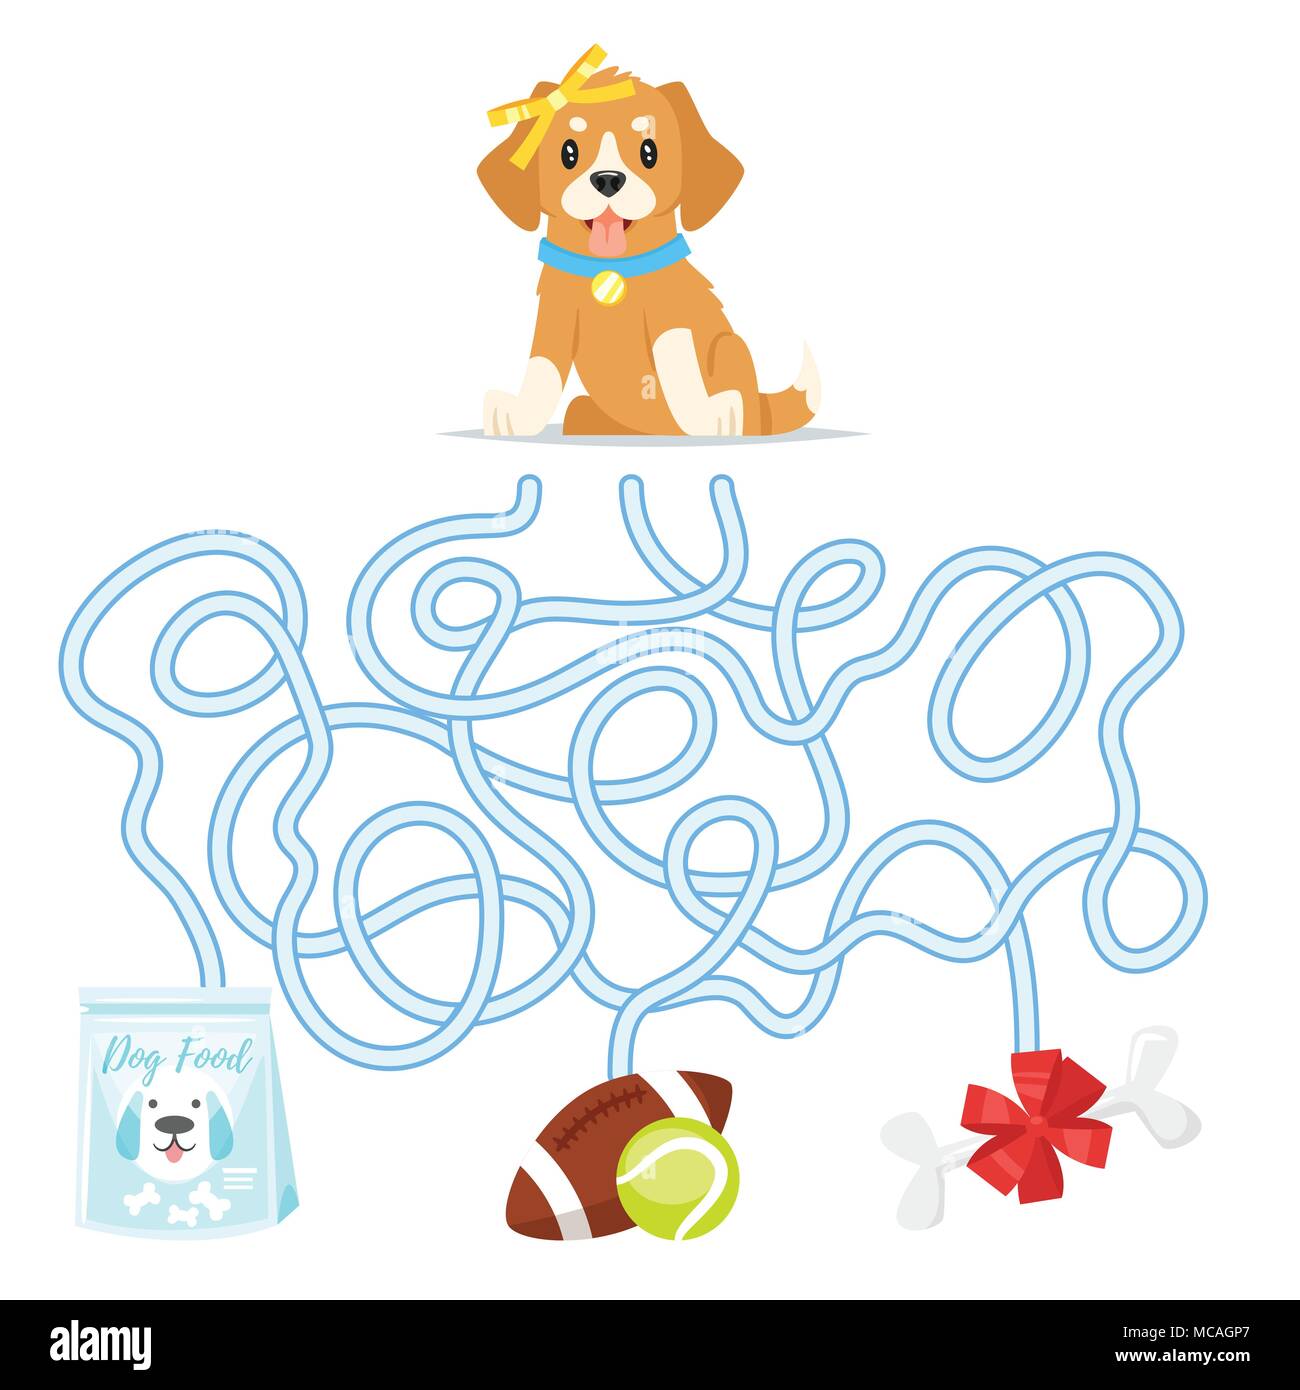 https://c8.alamy.com/comp/MCAGP7/vector-cartoon-style-illustration-of-funny-maze-or-labyrinth-for-children-help-the-puppy-dog-find-food-ball-or-bone-MCAGP7.jpg